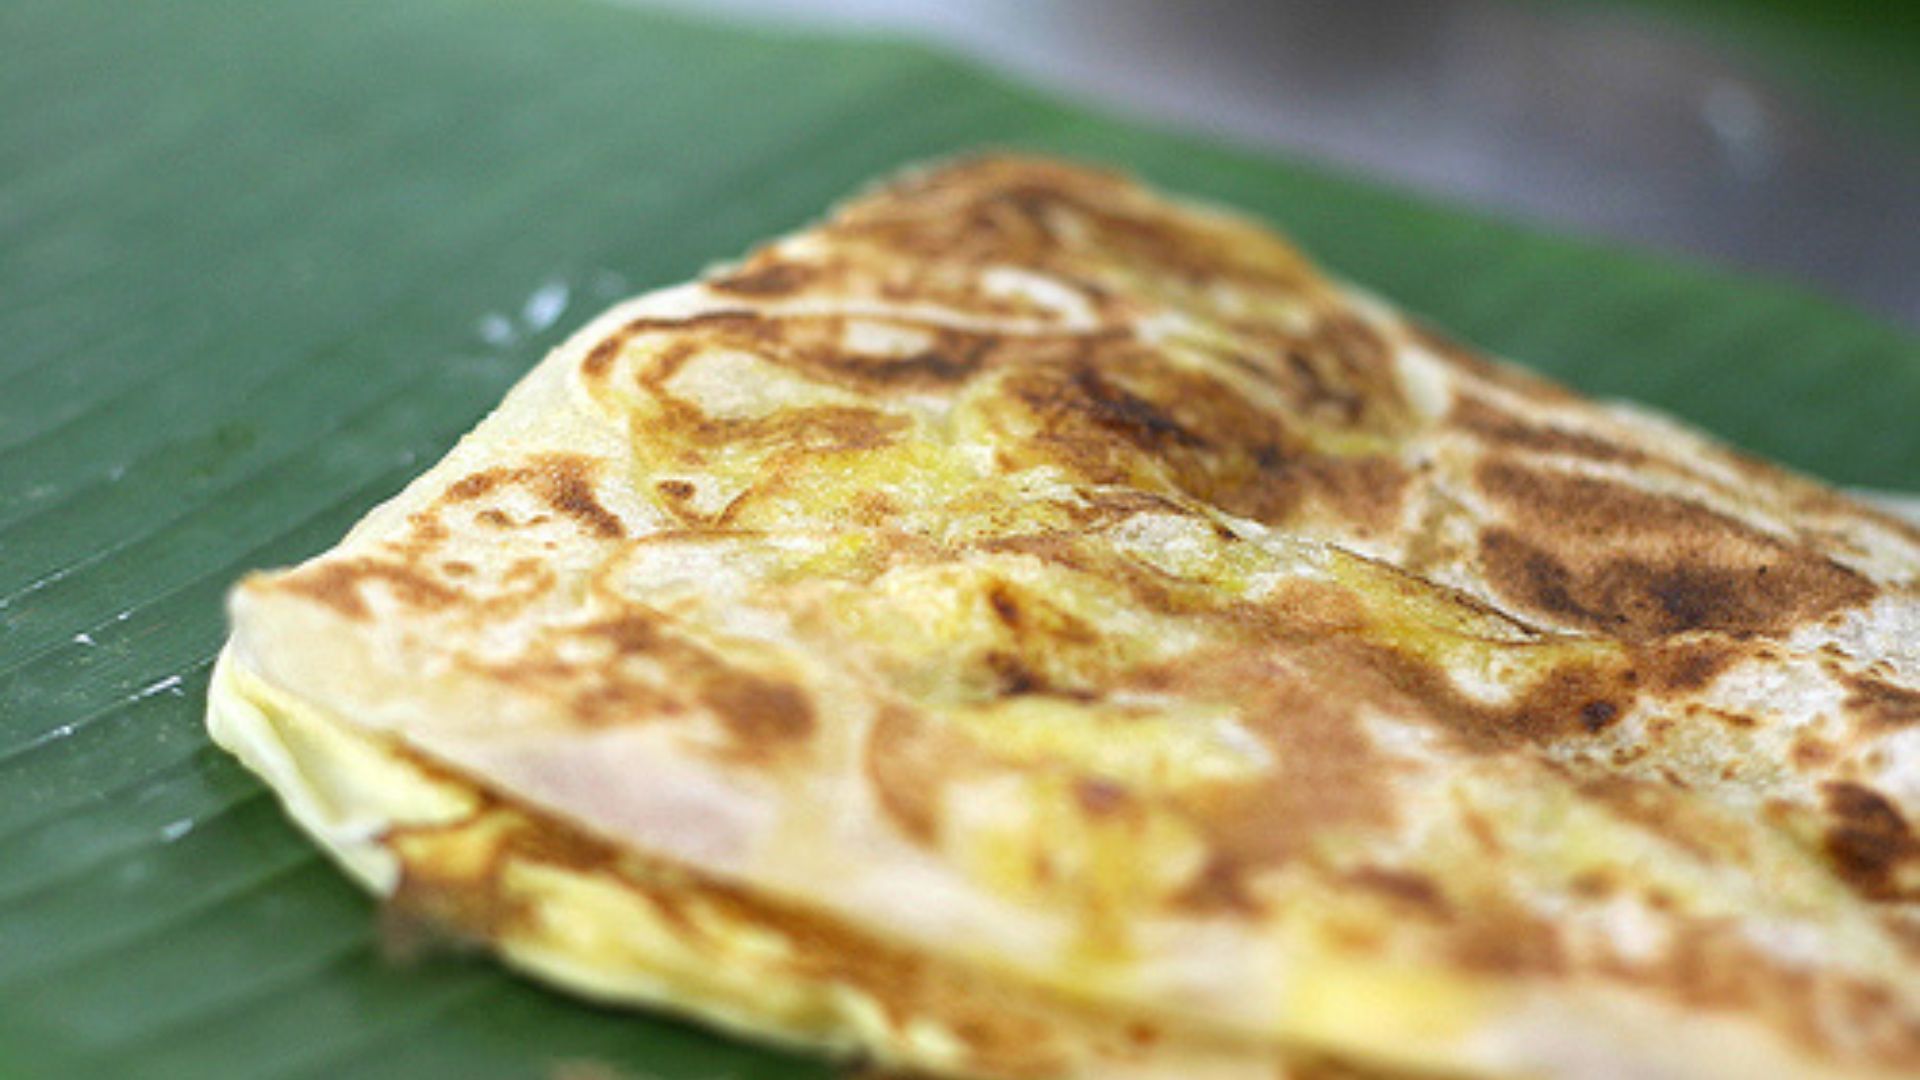 Malaysian ‘roti canai’ named the best street food in the world